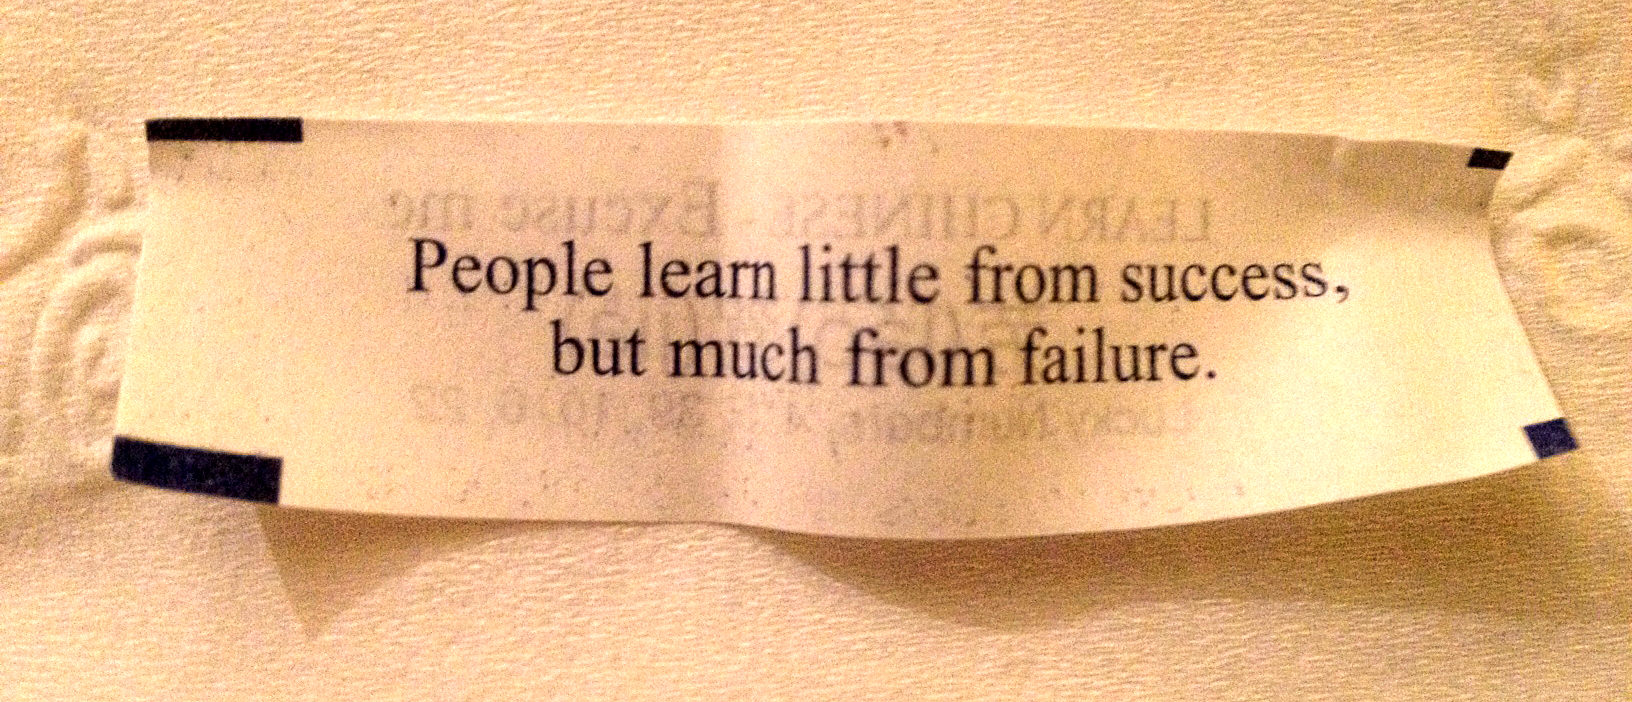 People learn little from success, but much from failure